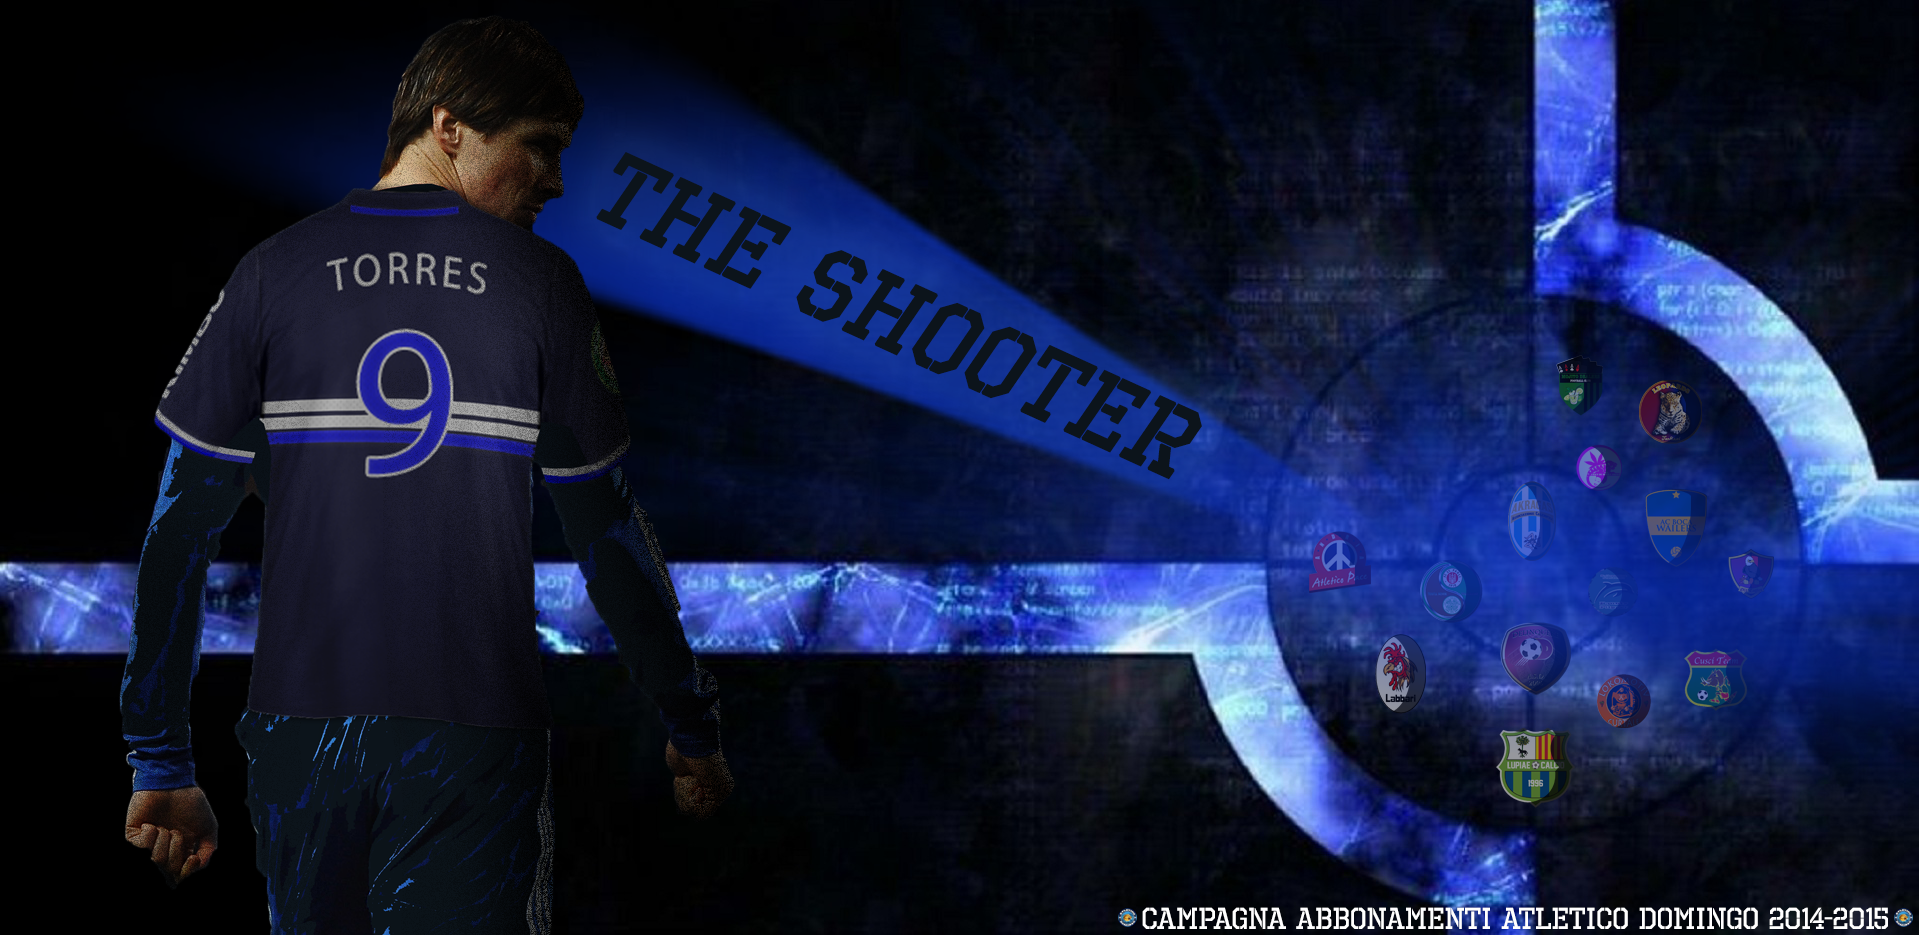 the shooter